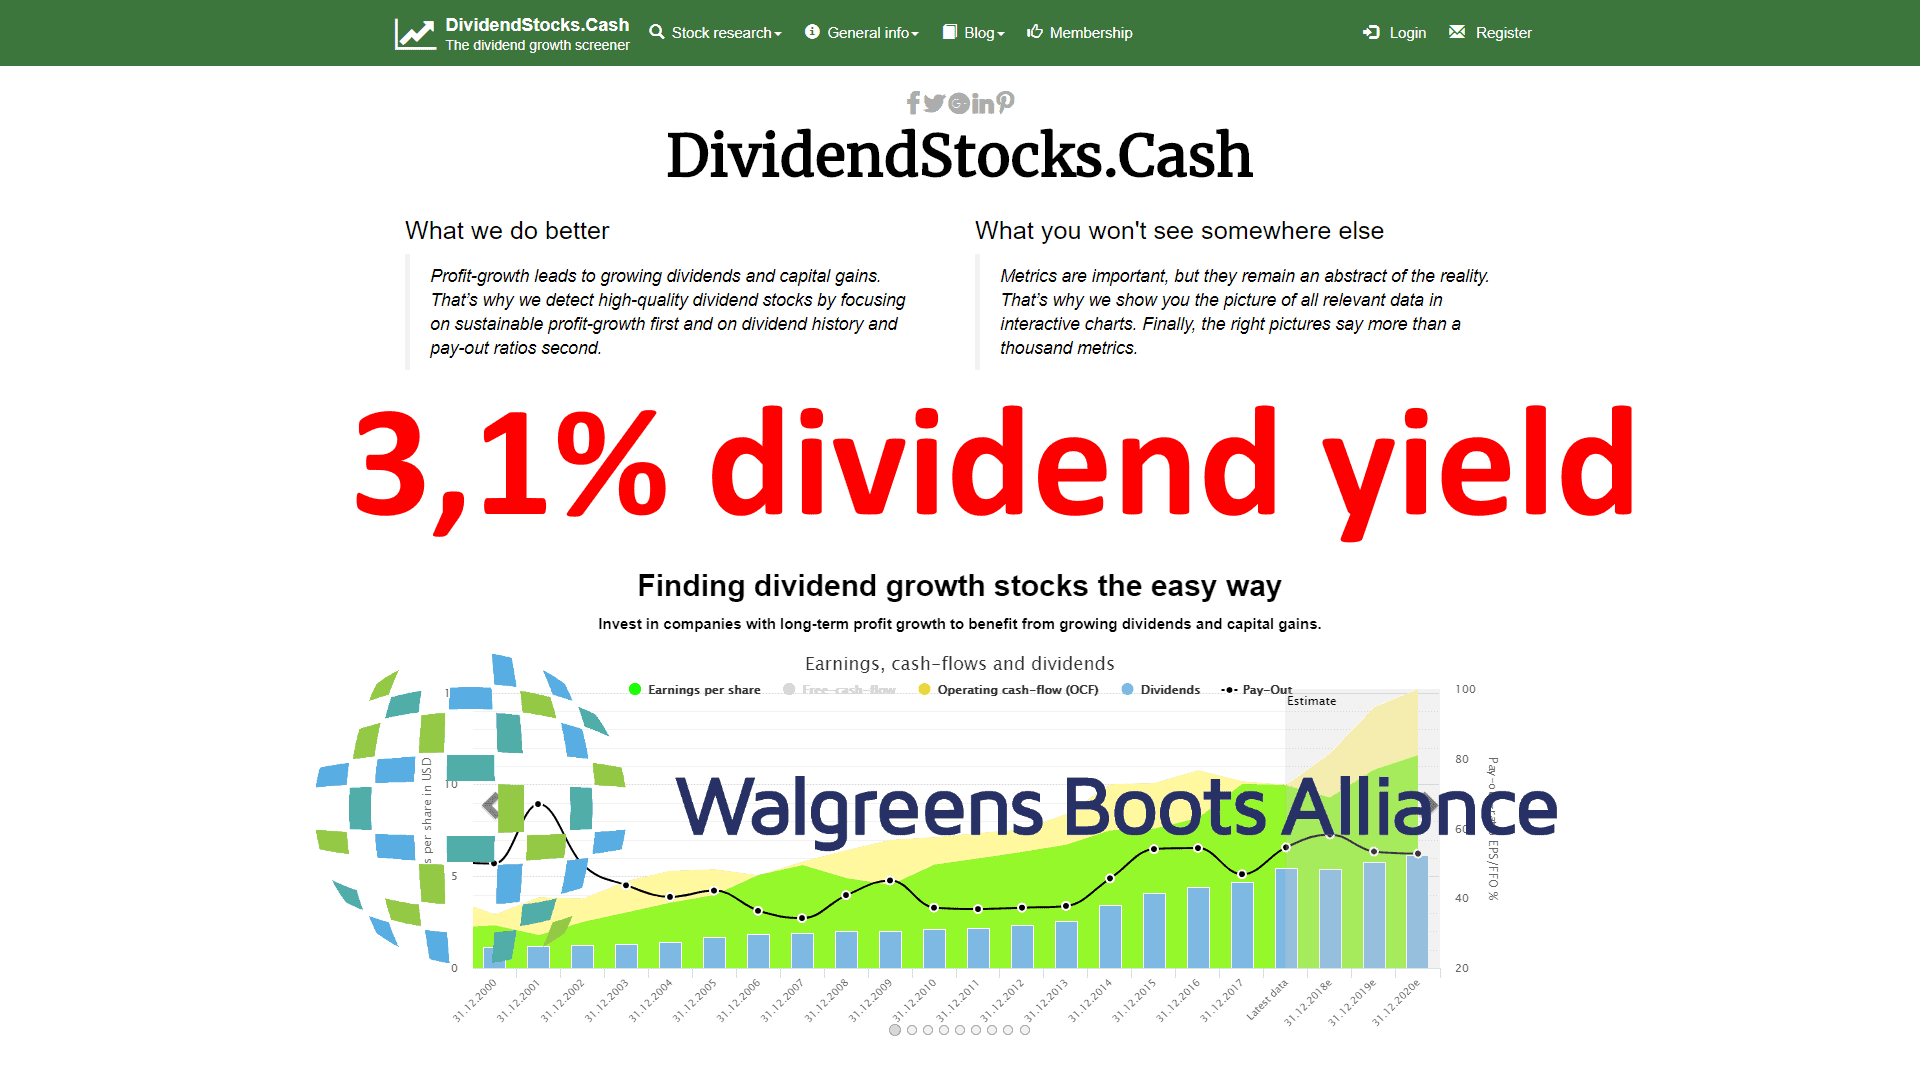 Walgreens Boot Alliance stock - price drop as buying opportunity?